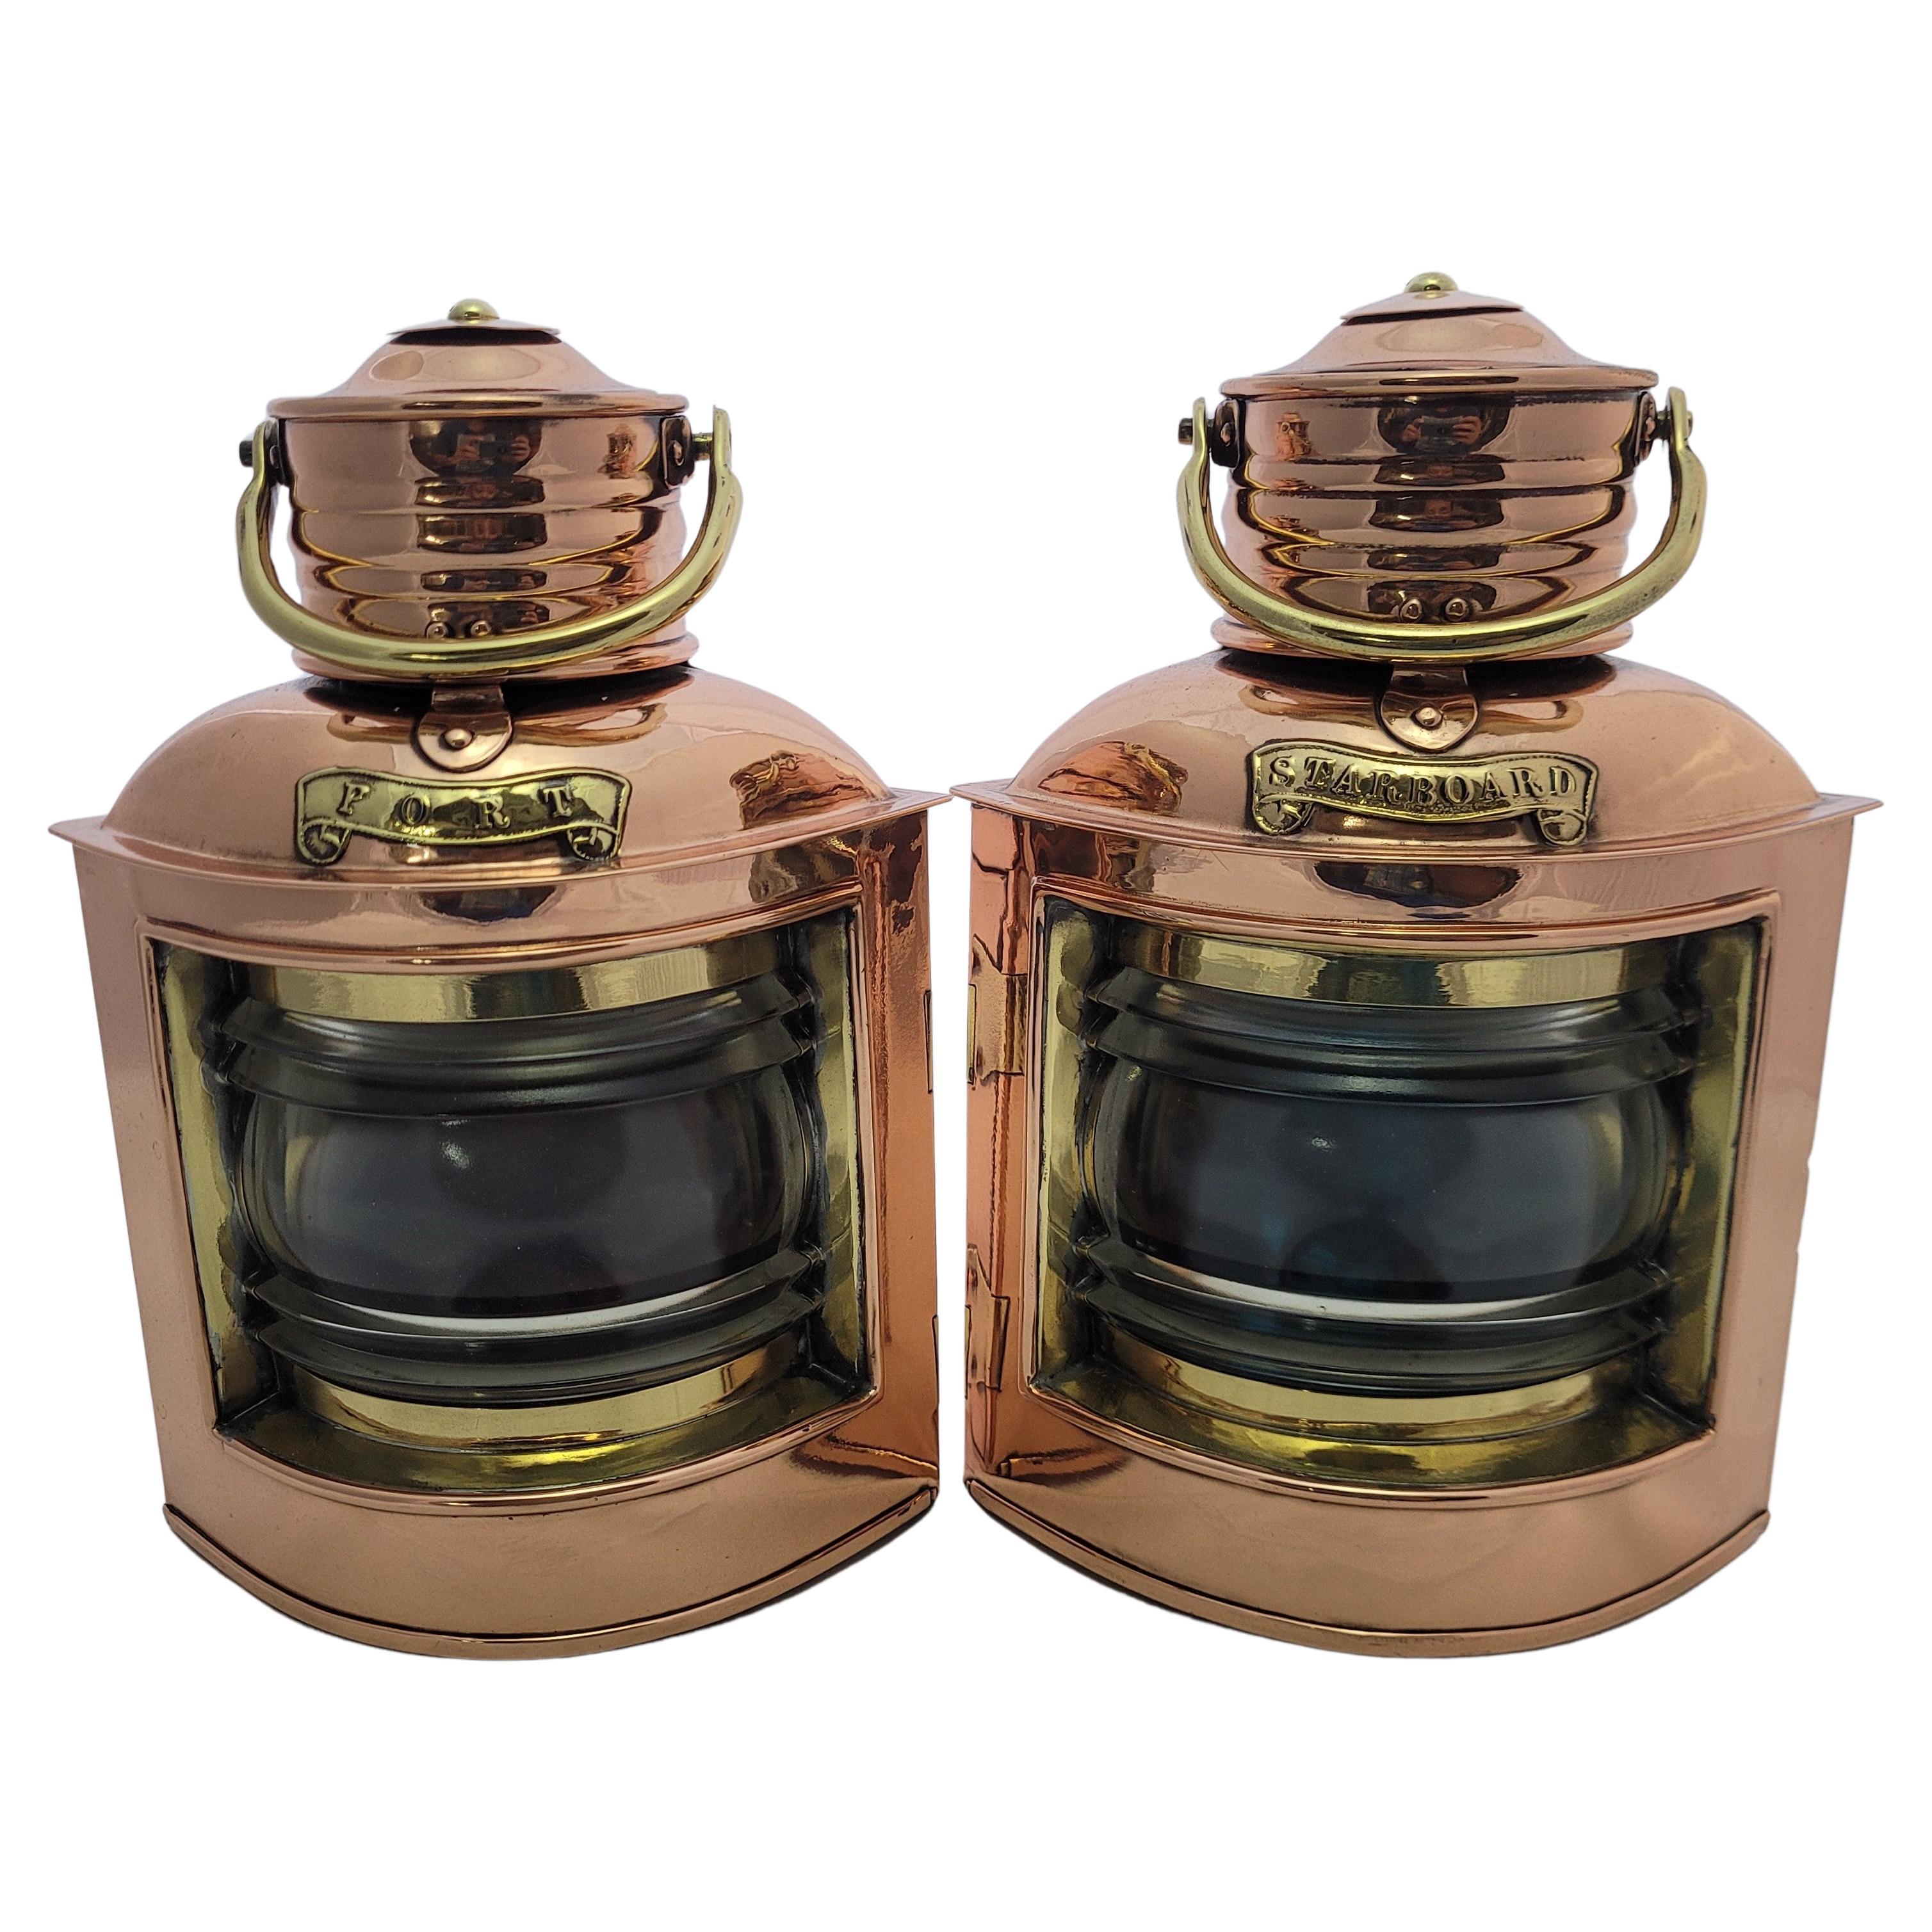 Pair of Copper Ships Lanterns from England